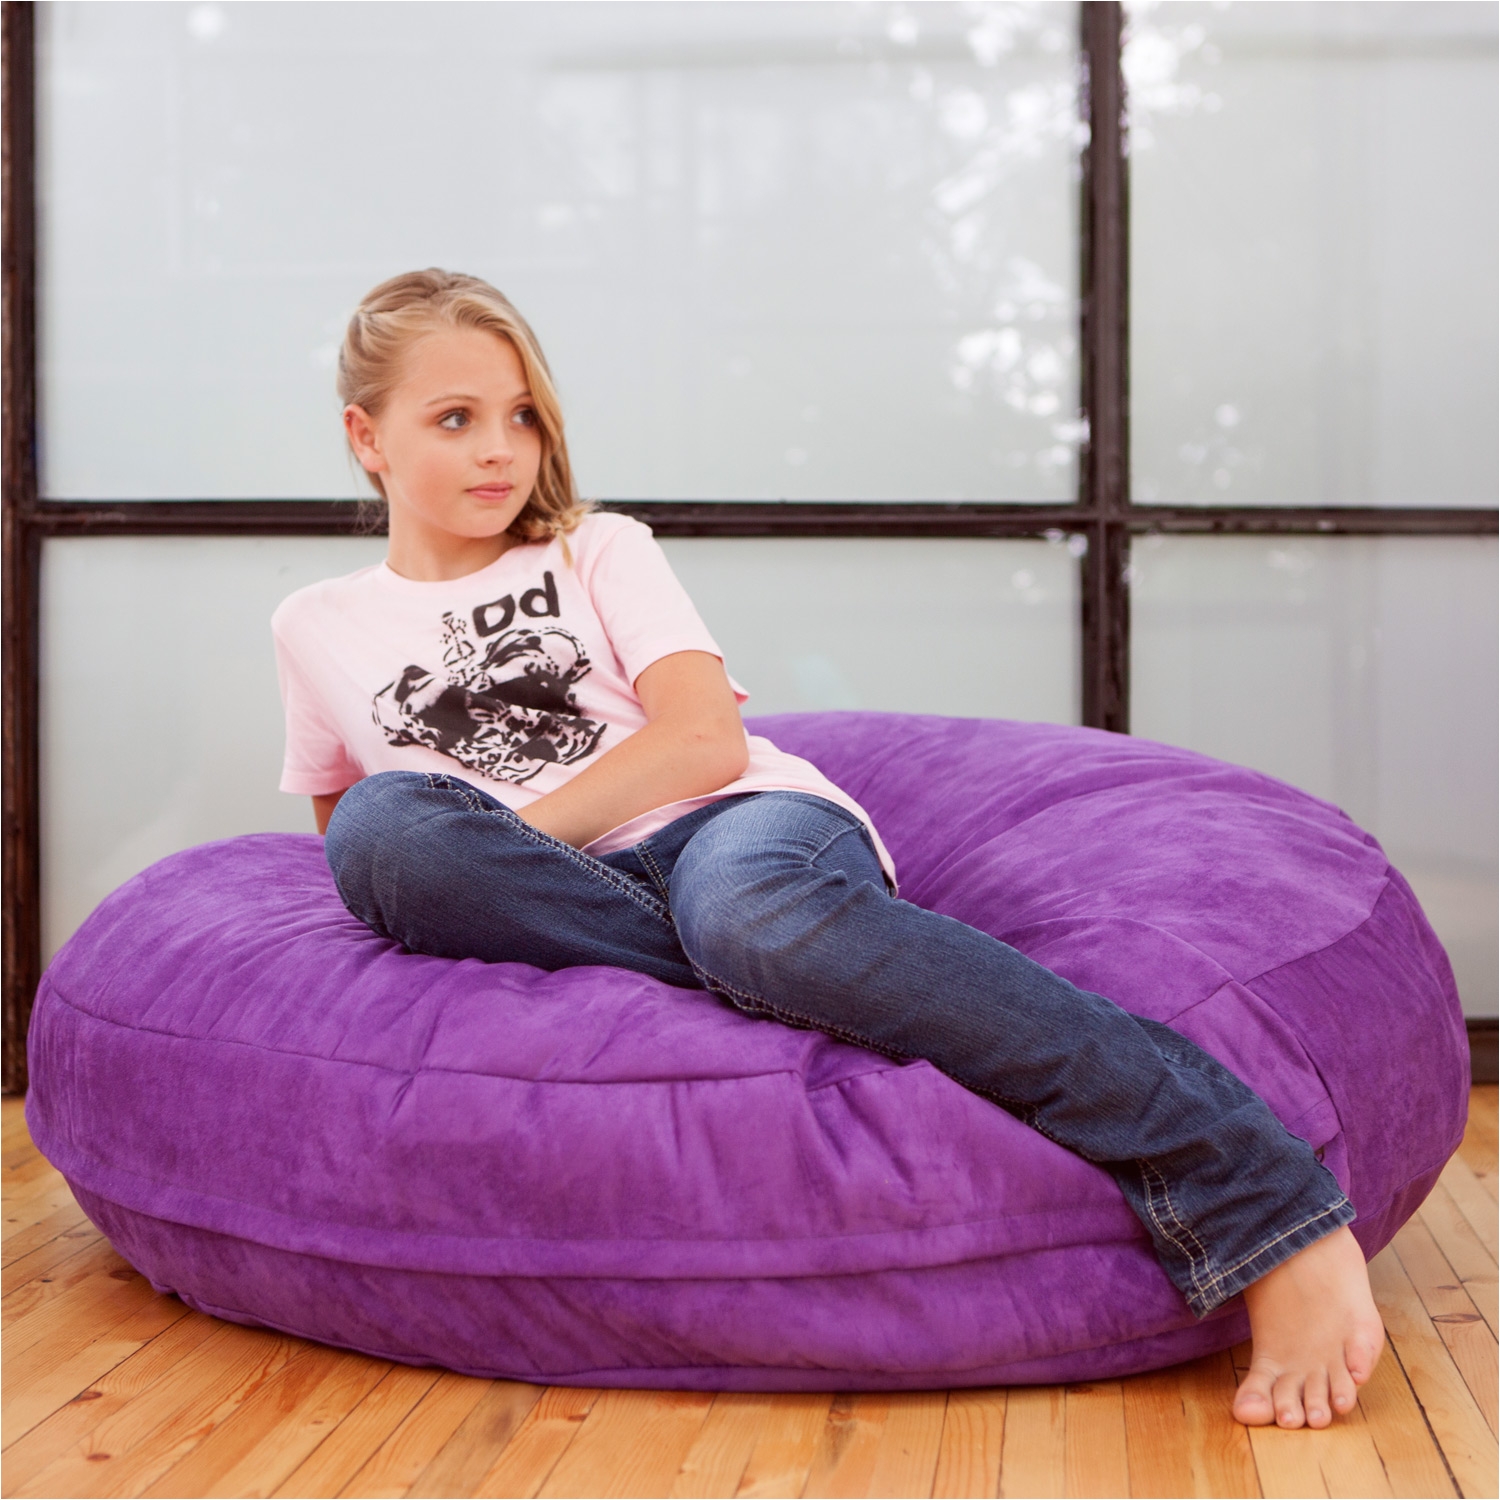 funiture pretty girl in pink shirt over round purple bean bag chairs for kidsin simple